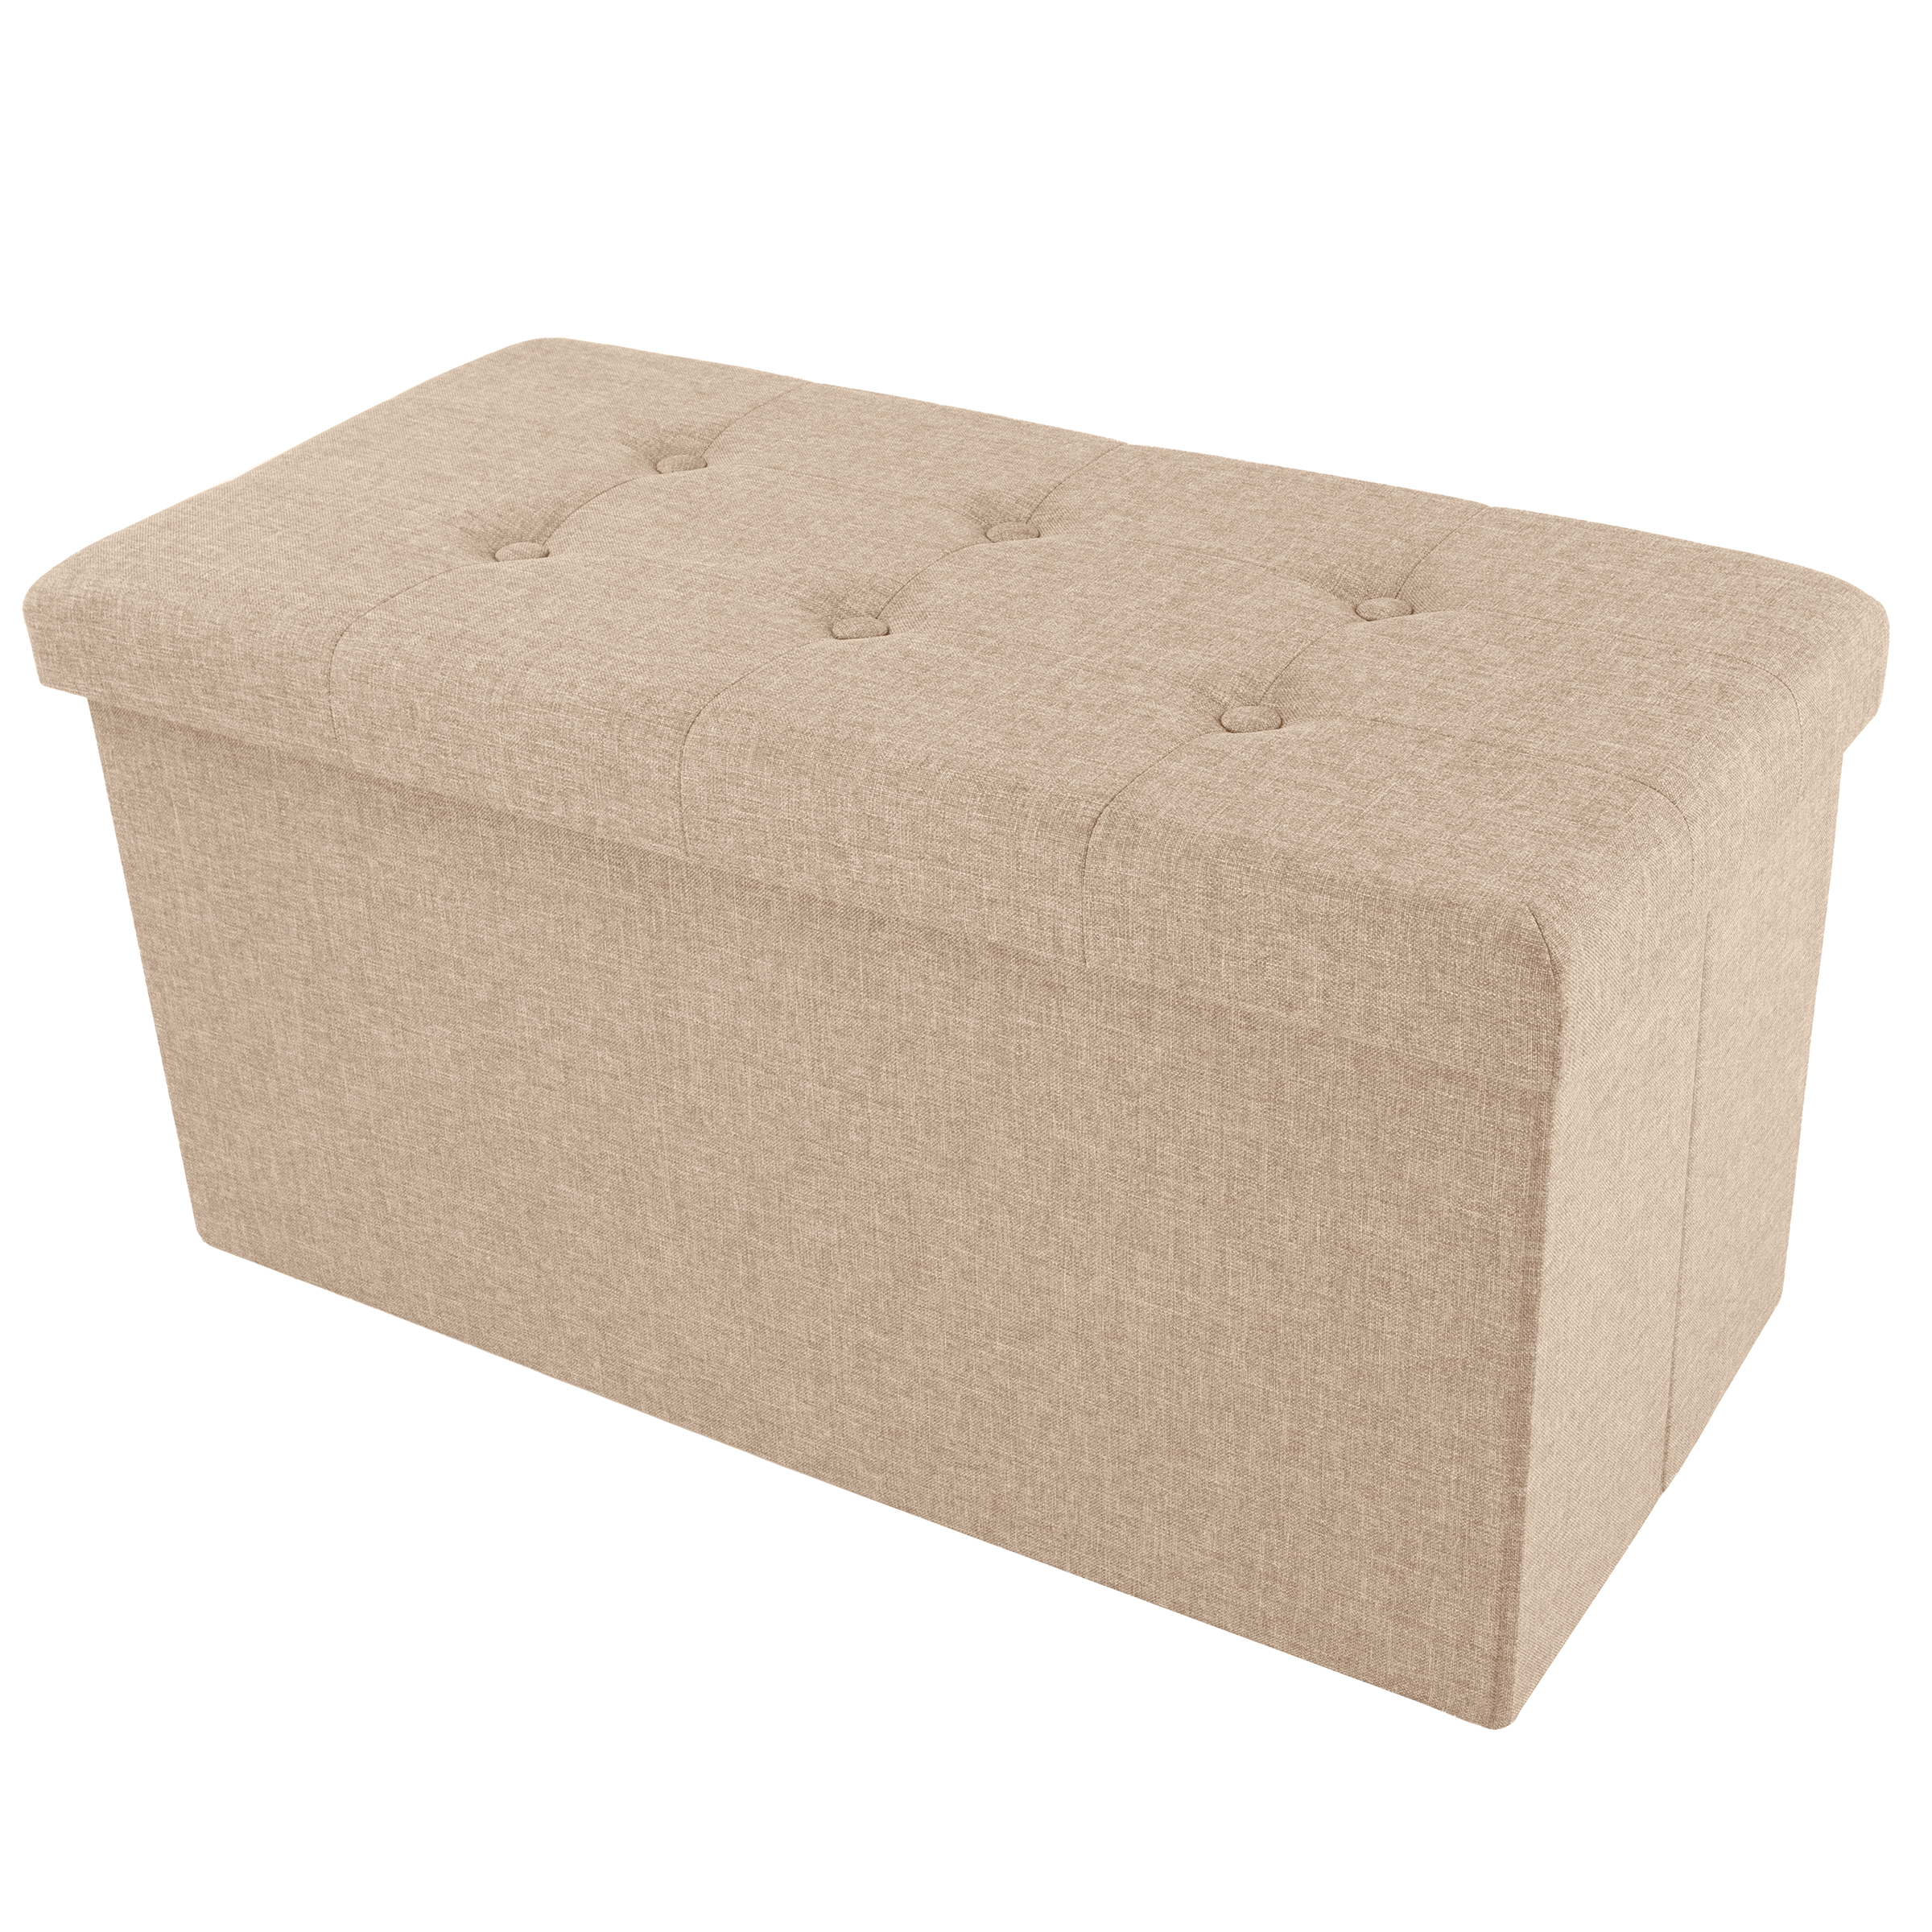 Lavish Home 30-inch Folding Storage Ottoman with Removable Bin (Beige) - image 1 of 8